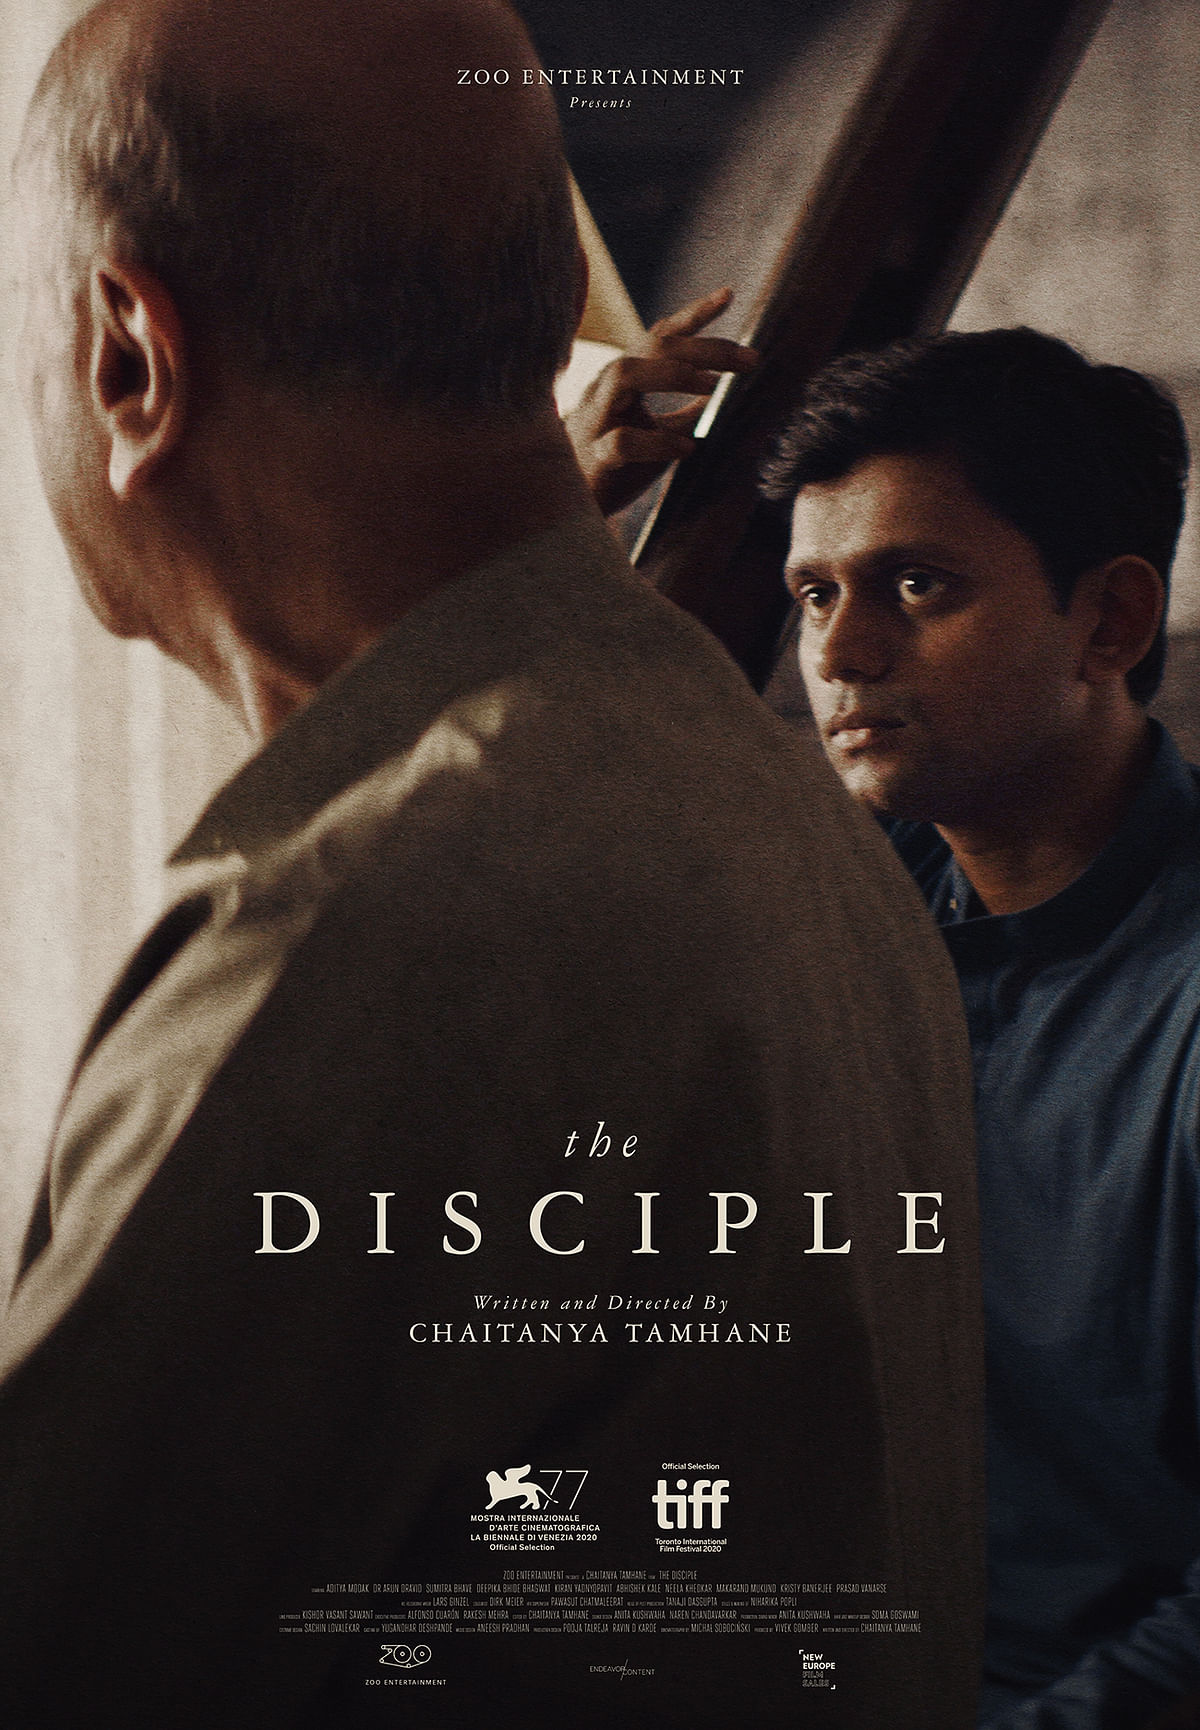 The review of Chaitanya Tamhane’s film The Disciple which premiered at the Venice International Film Festival.